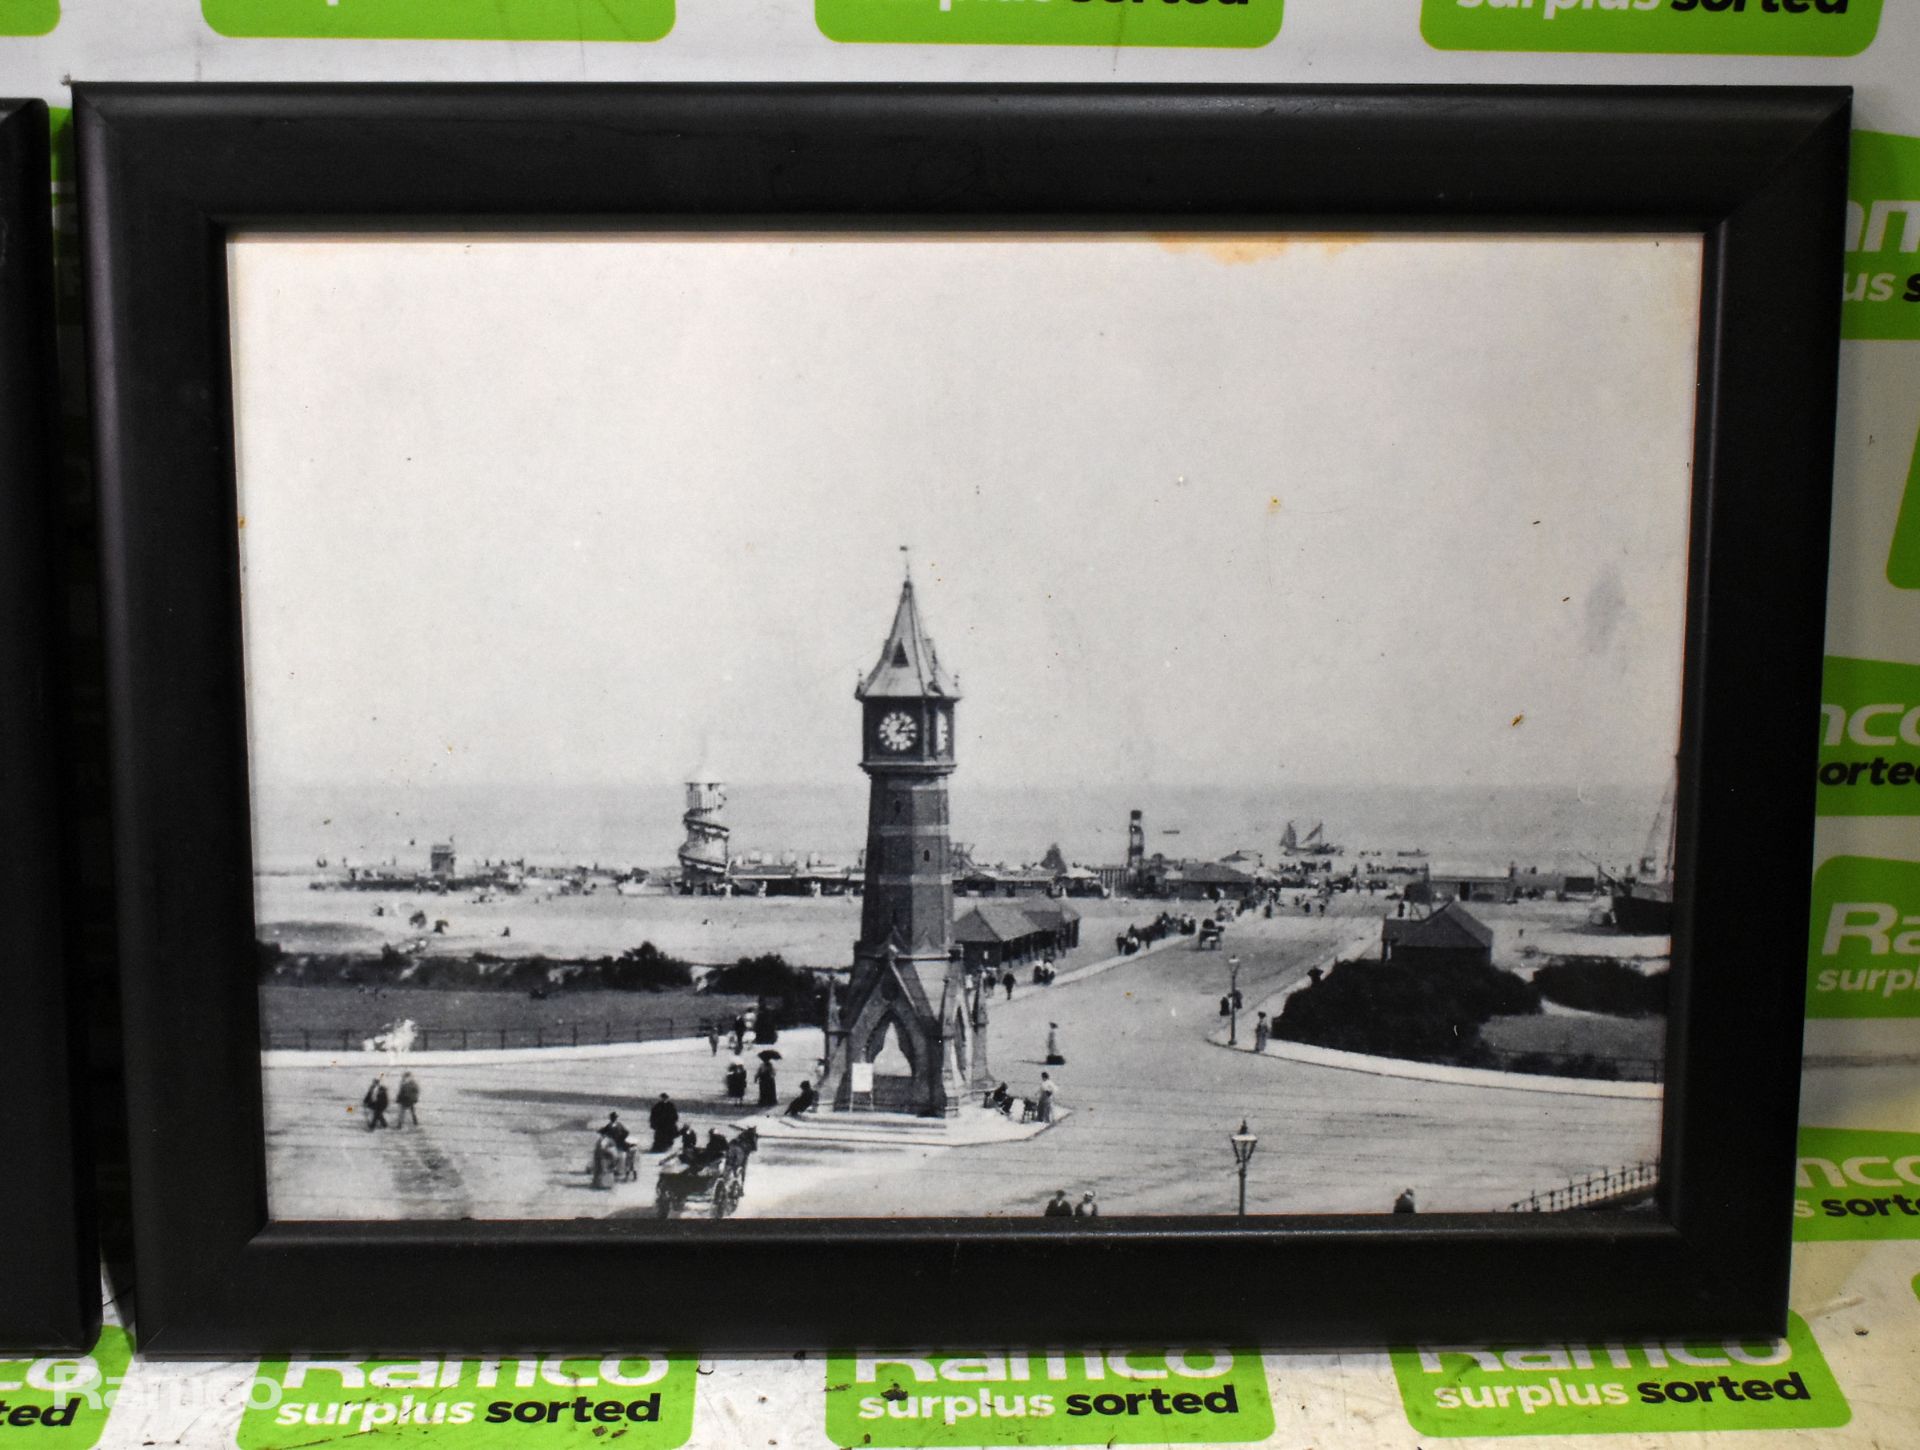 4x Skegness memorabilia photos - Clock Tower and Grande Parade - frame size: 13.5 x 10 inches - Image 5 of 5